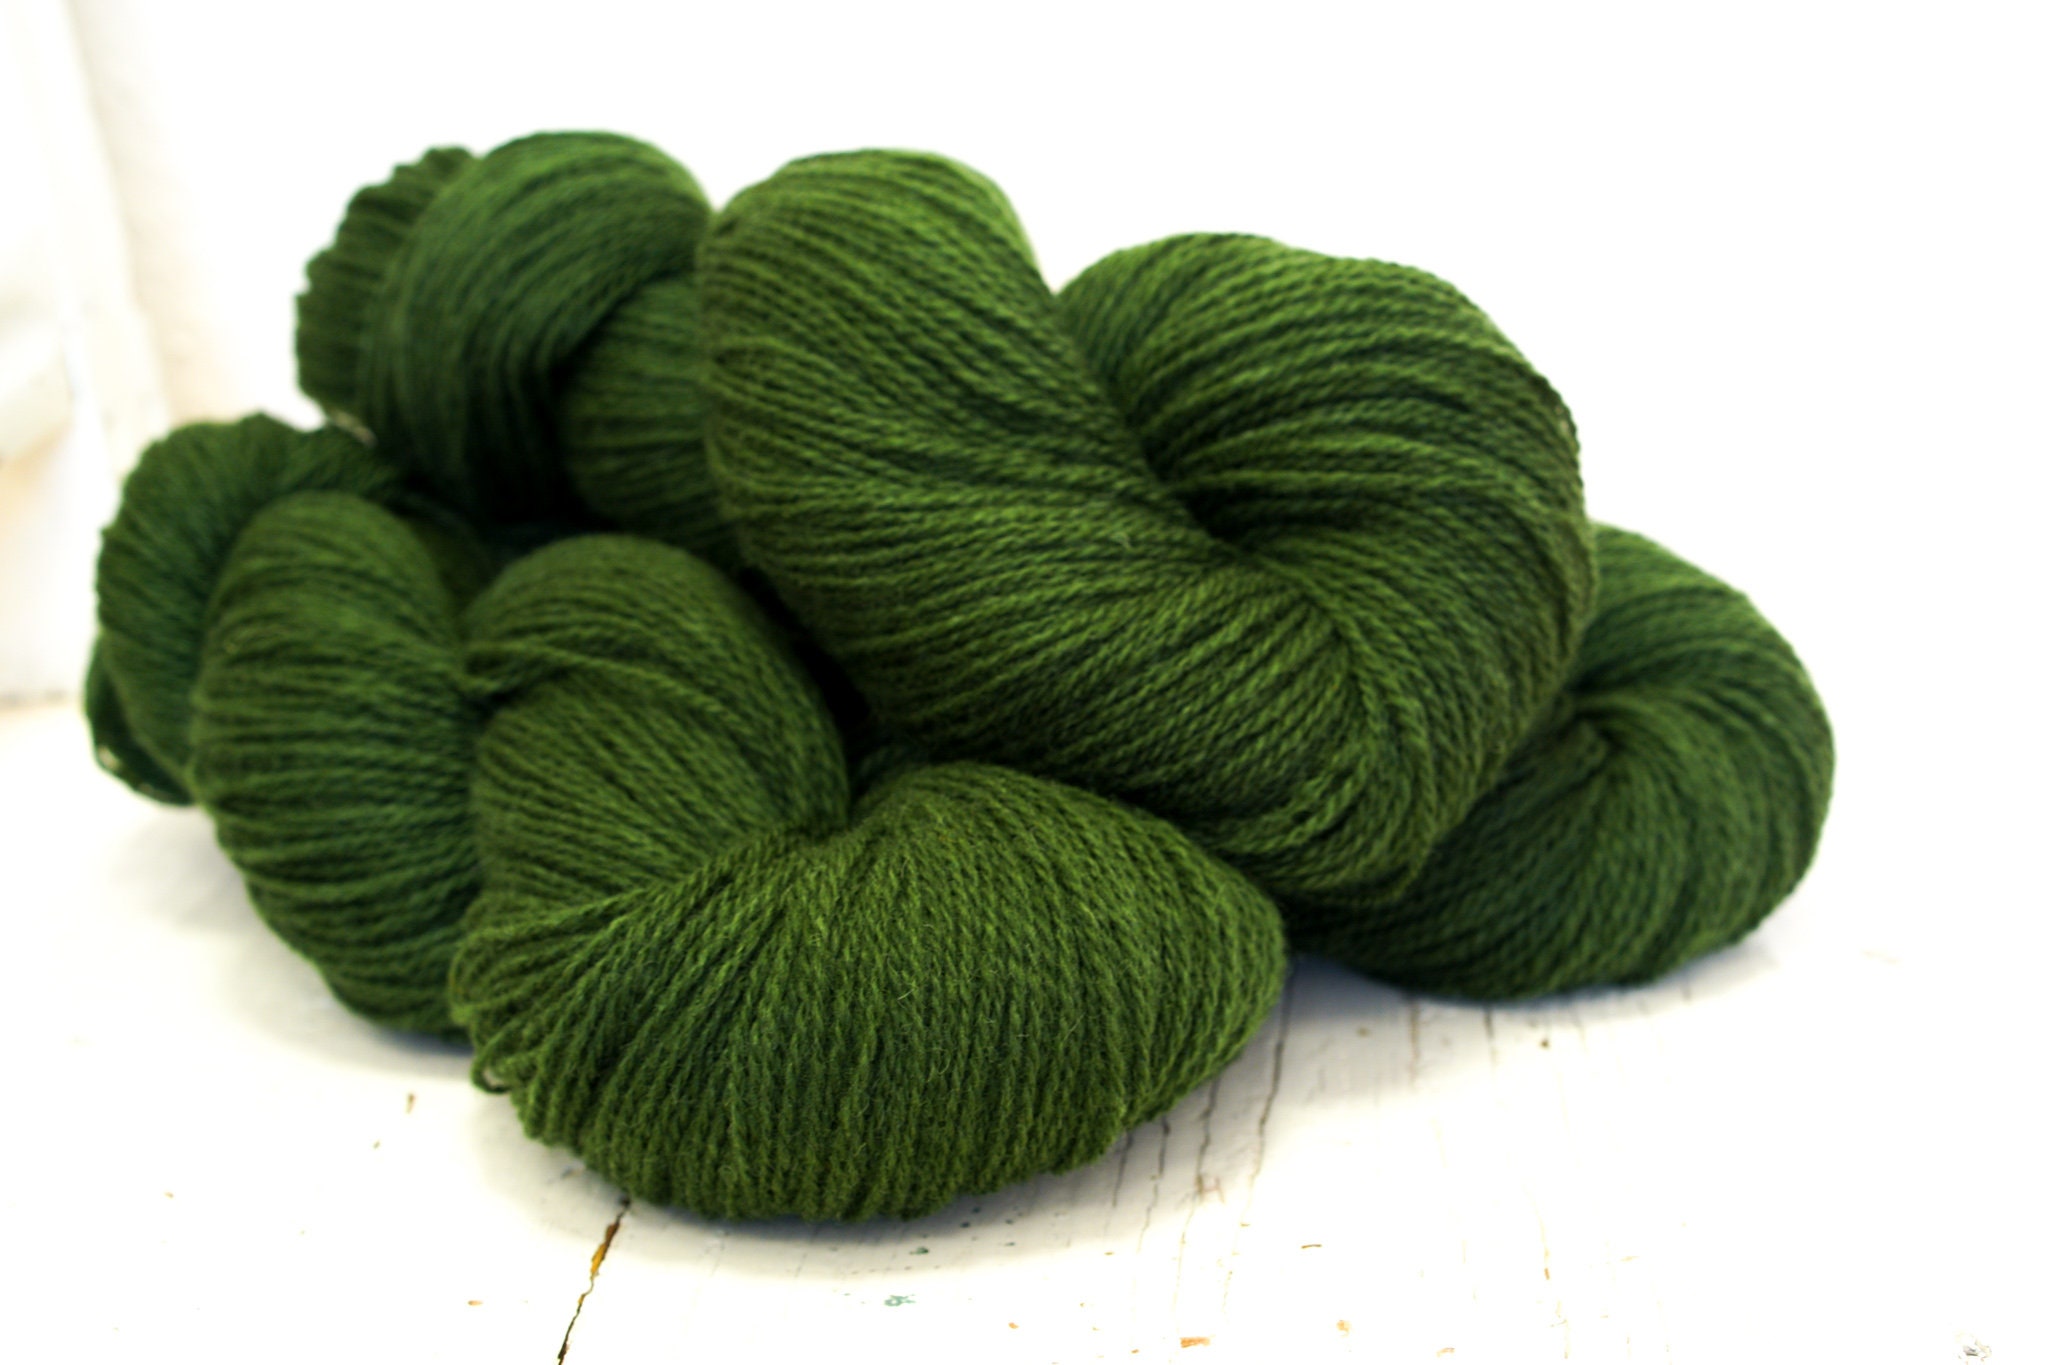 Forest Green Super Chunky Yarn. Cheeky Chunky Yarn by Wool Couture. 100g  Ball Chunky Yarn in Forest Green. Pure Merino Wool. 